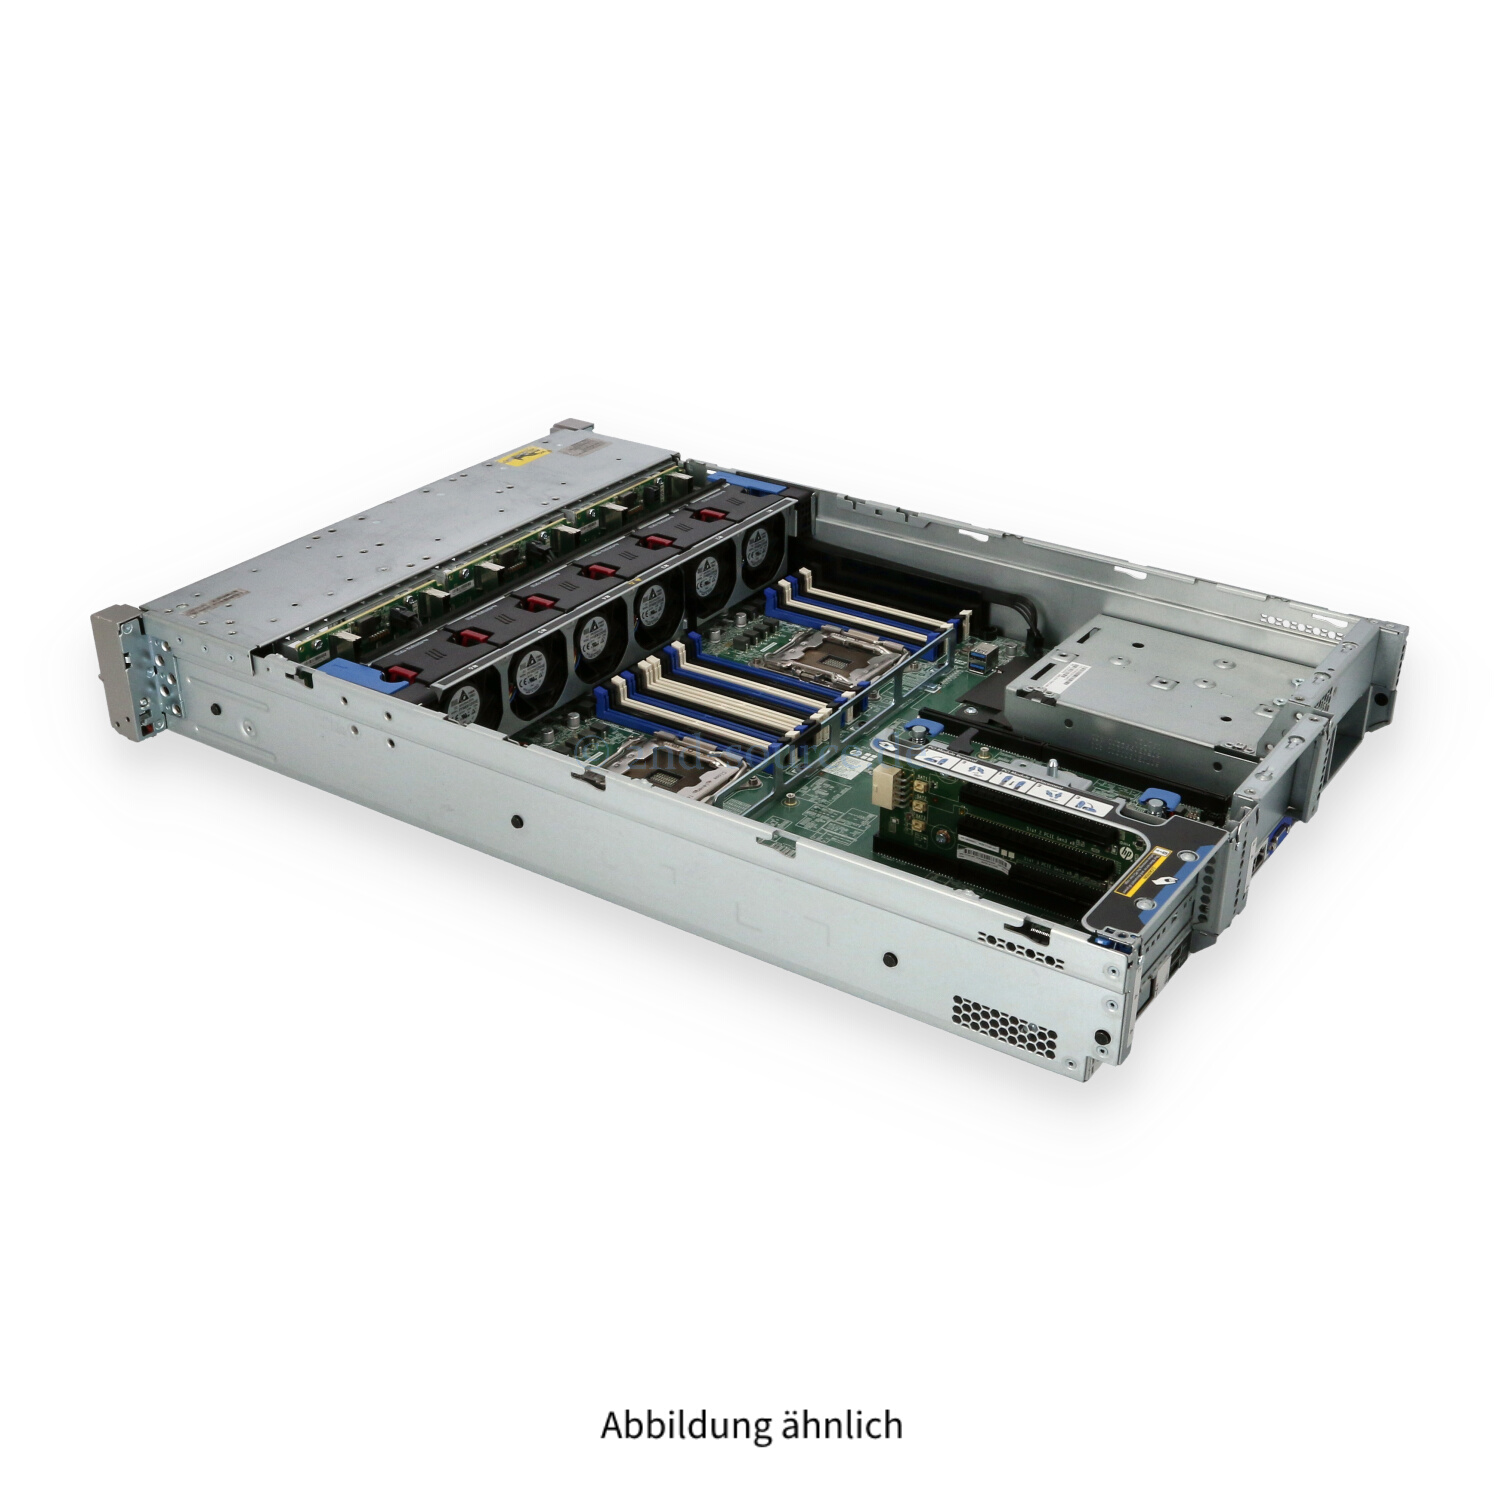 HPE DL380 G9 24xSFF CTO Server Chassis 767032-B21